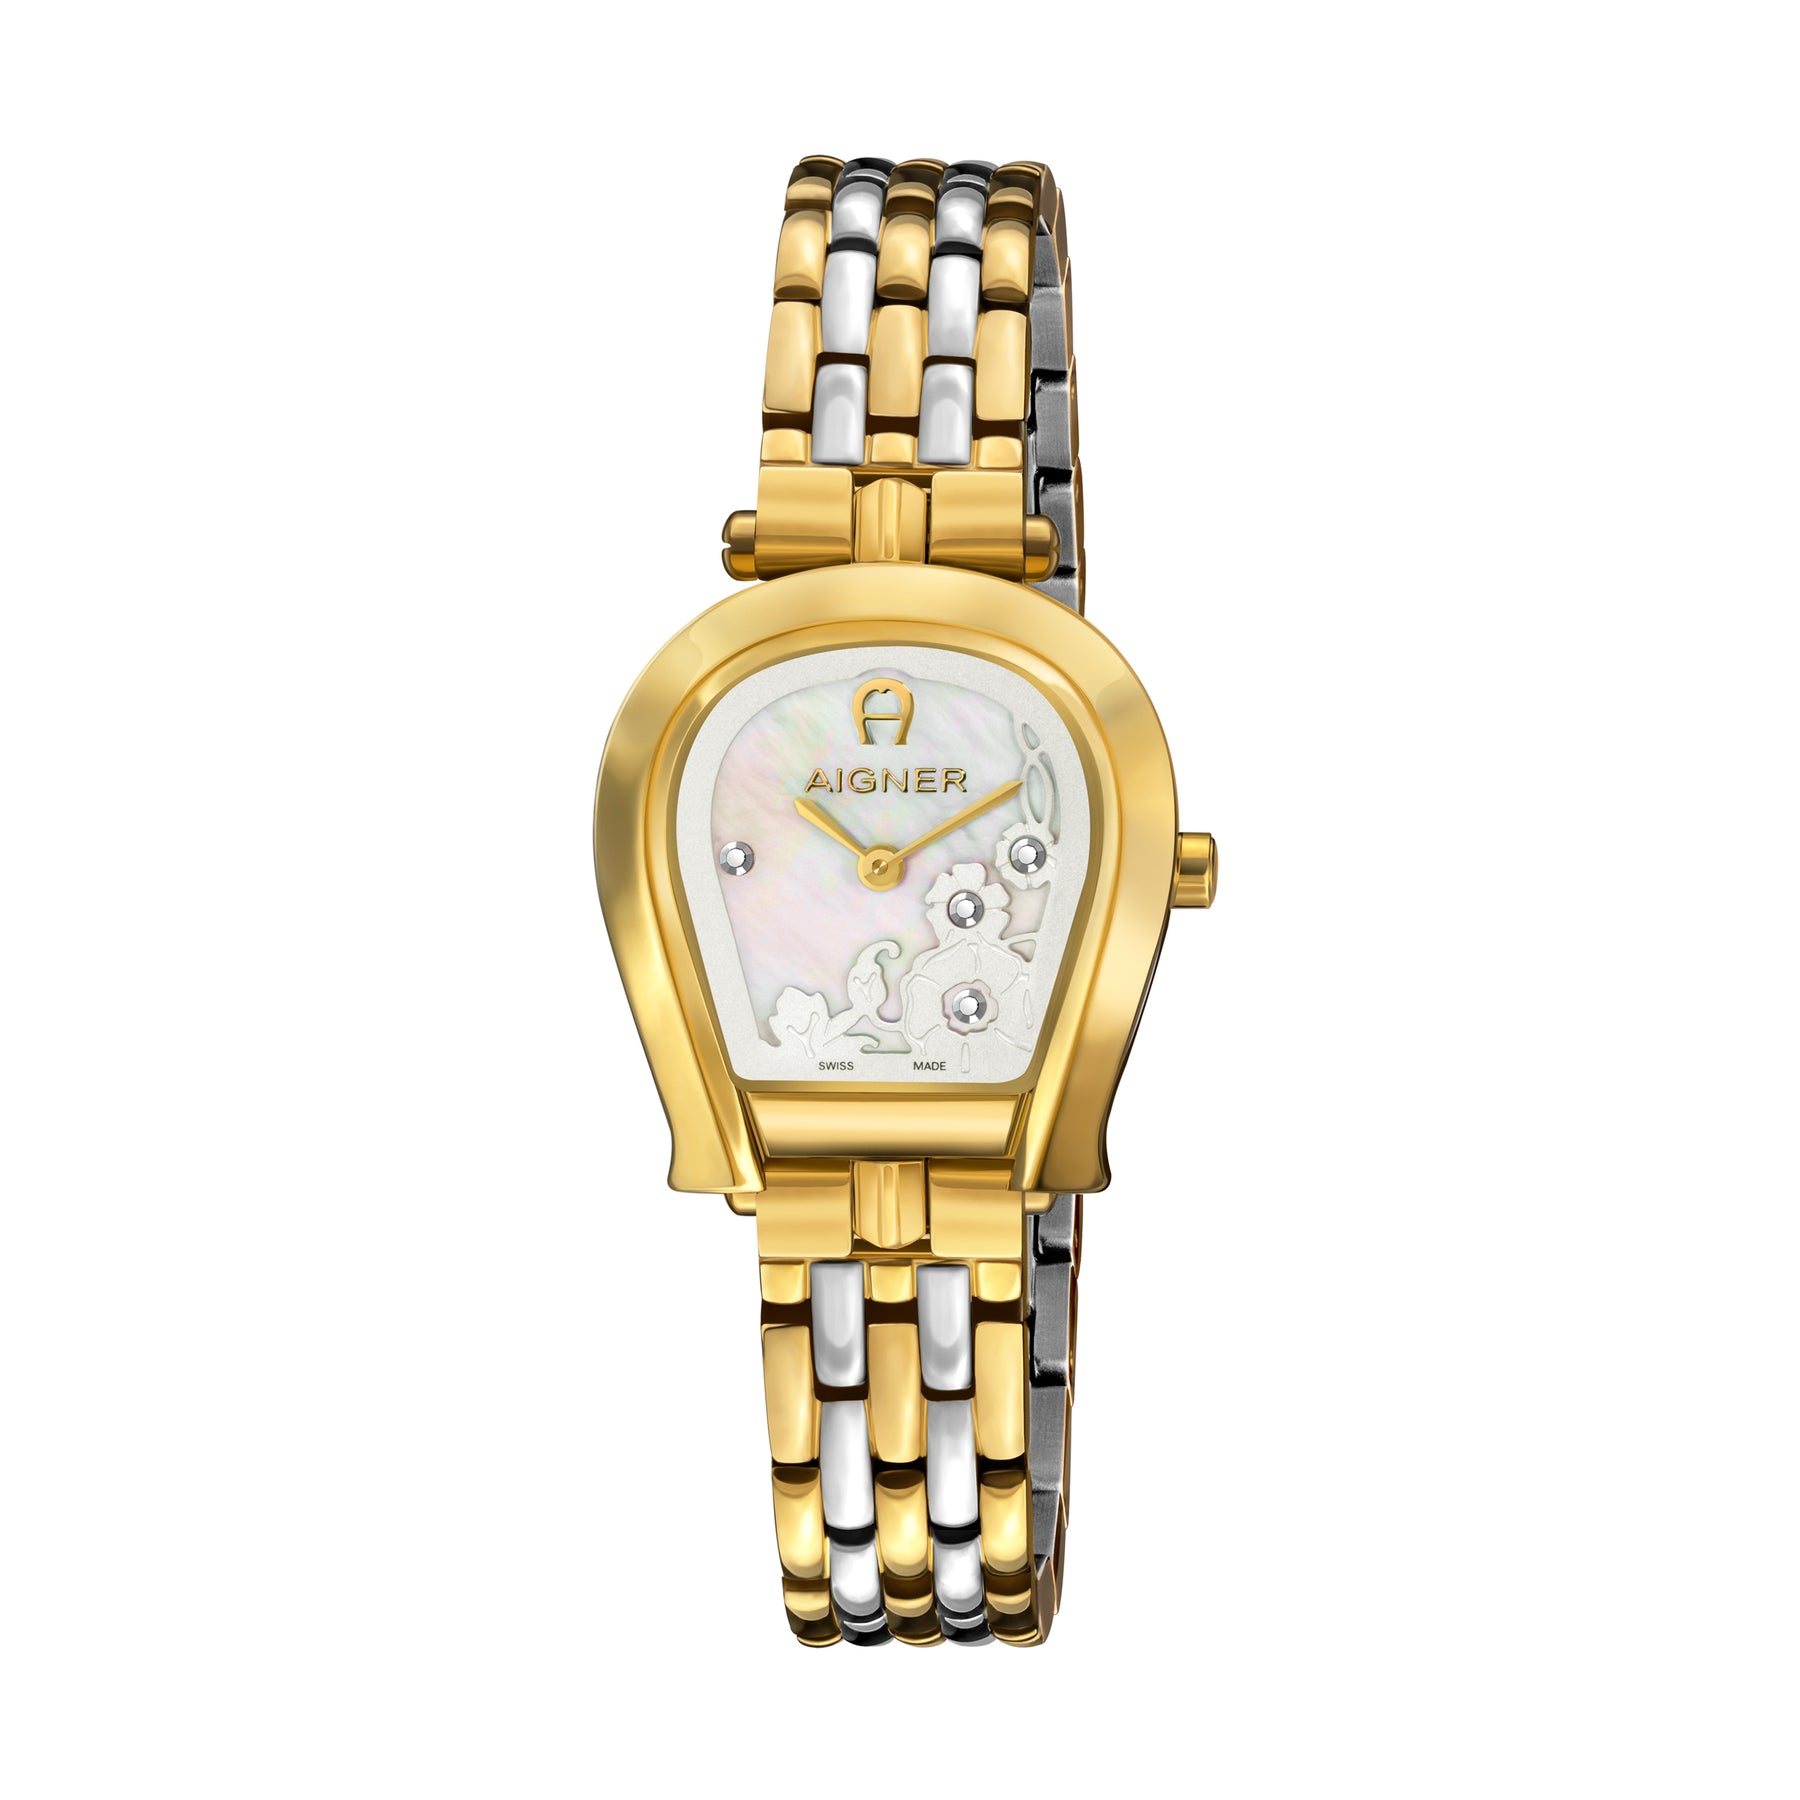 Buy AIGNER Watches Online in UAE | The Watch House